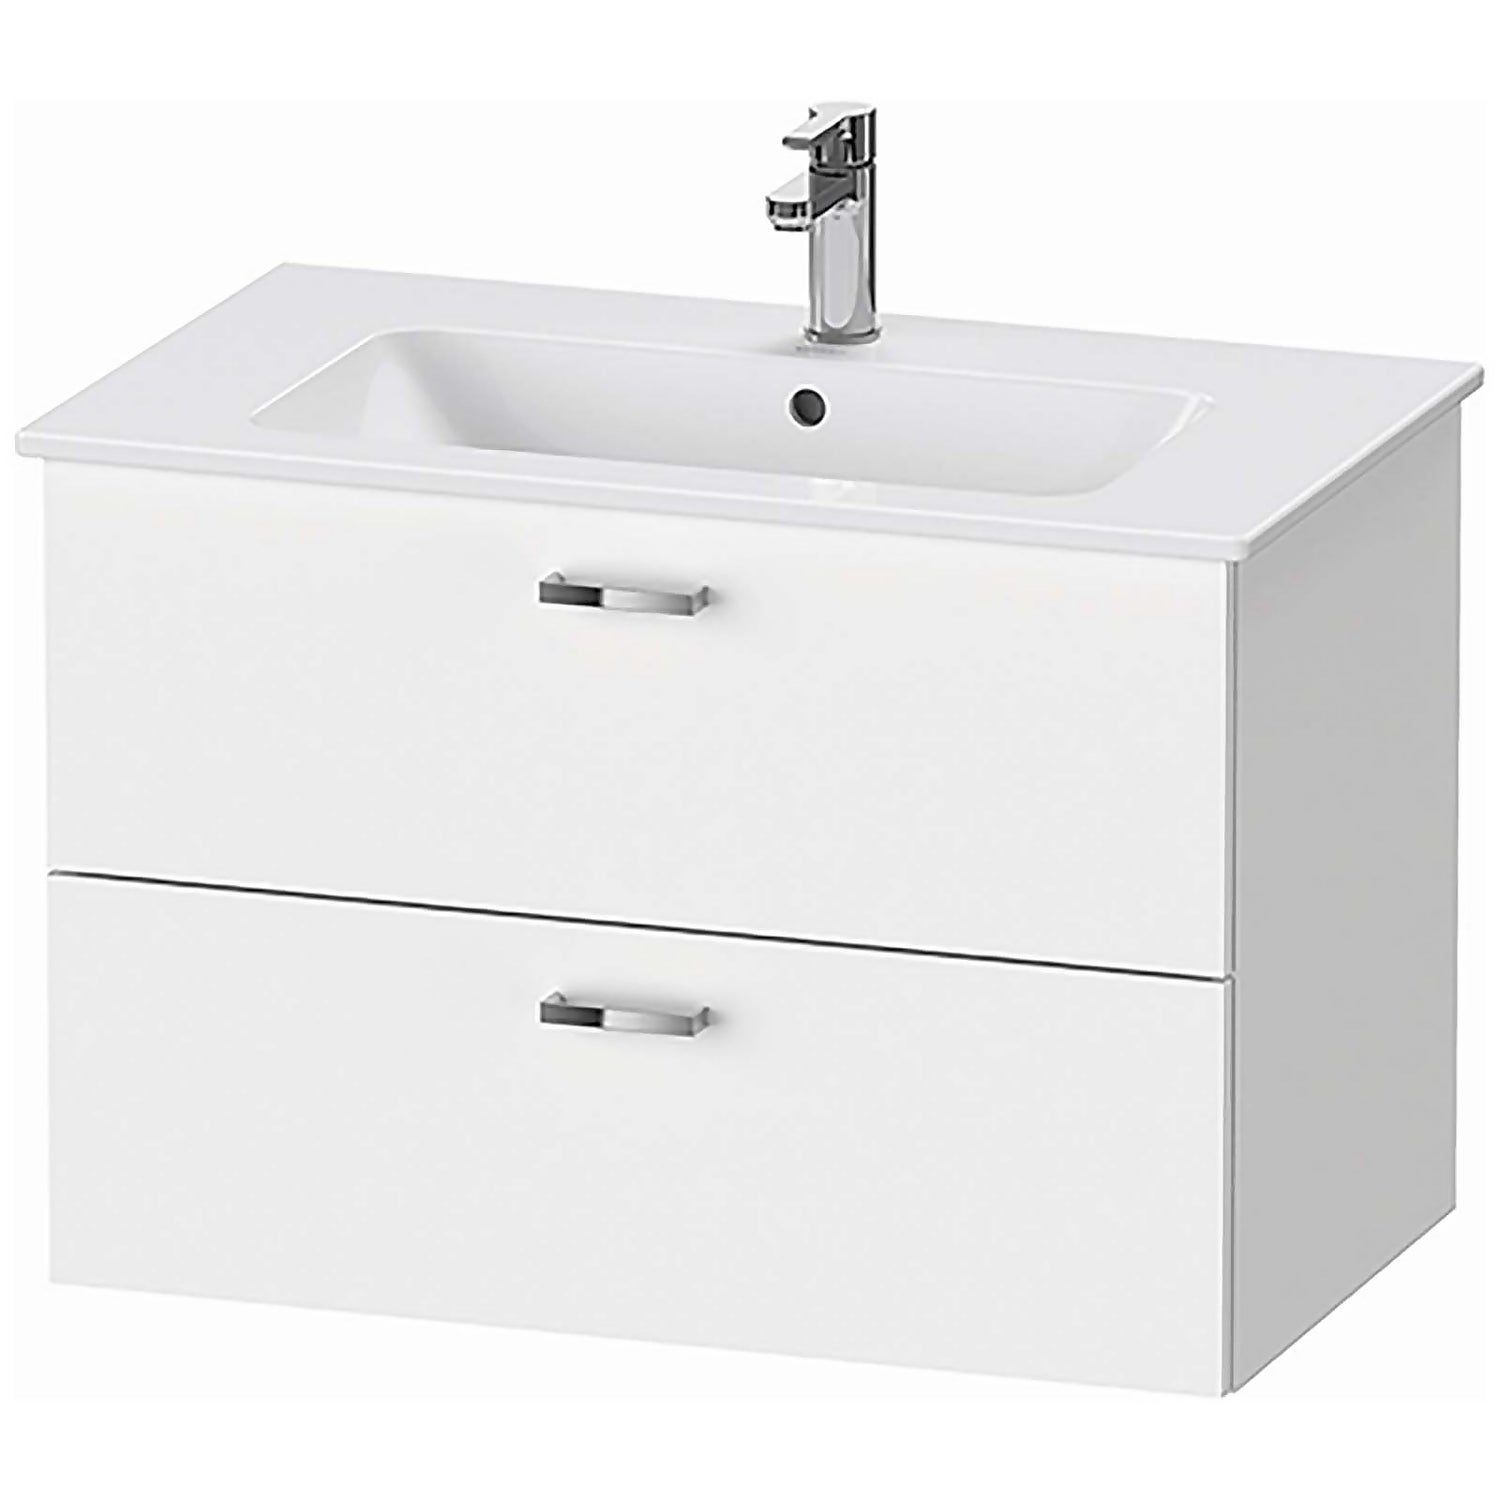 Duravit Xbase 800mm Basin Wall, Wall Mounted Bathroom Vanity And Accessory Shelf For Makeup Toiletries White